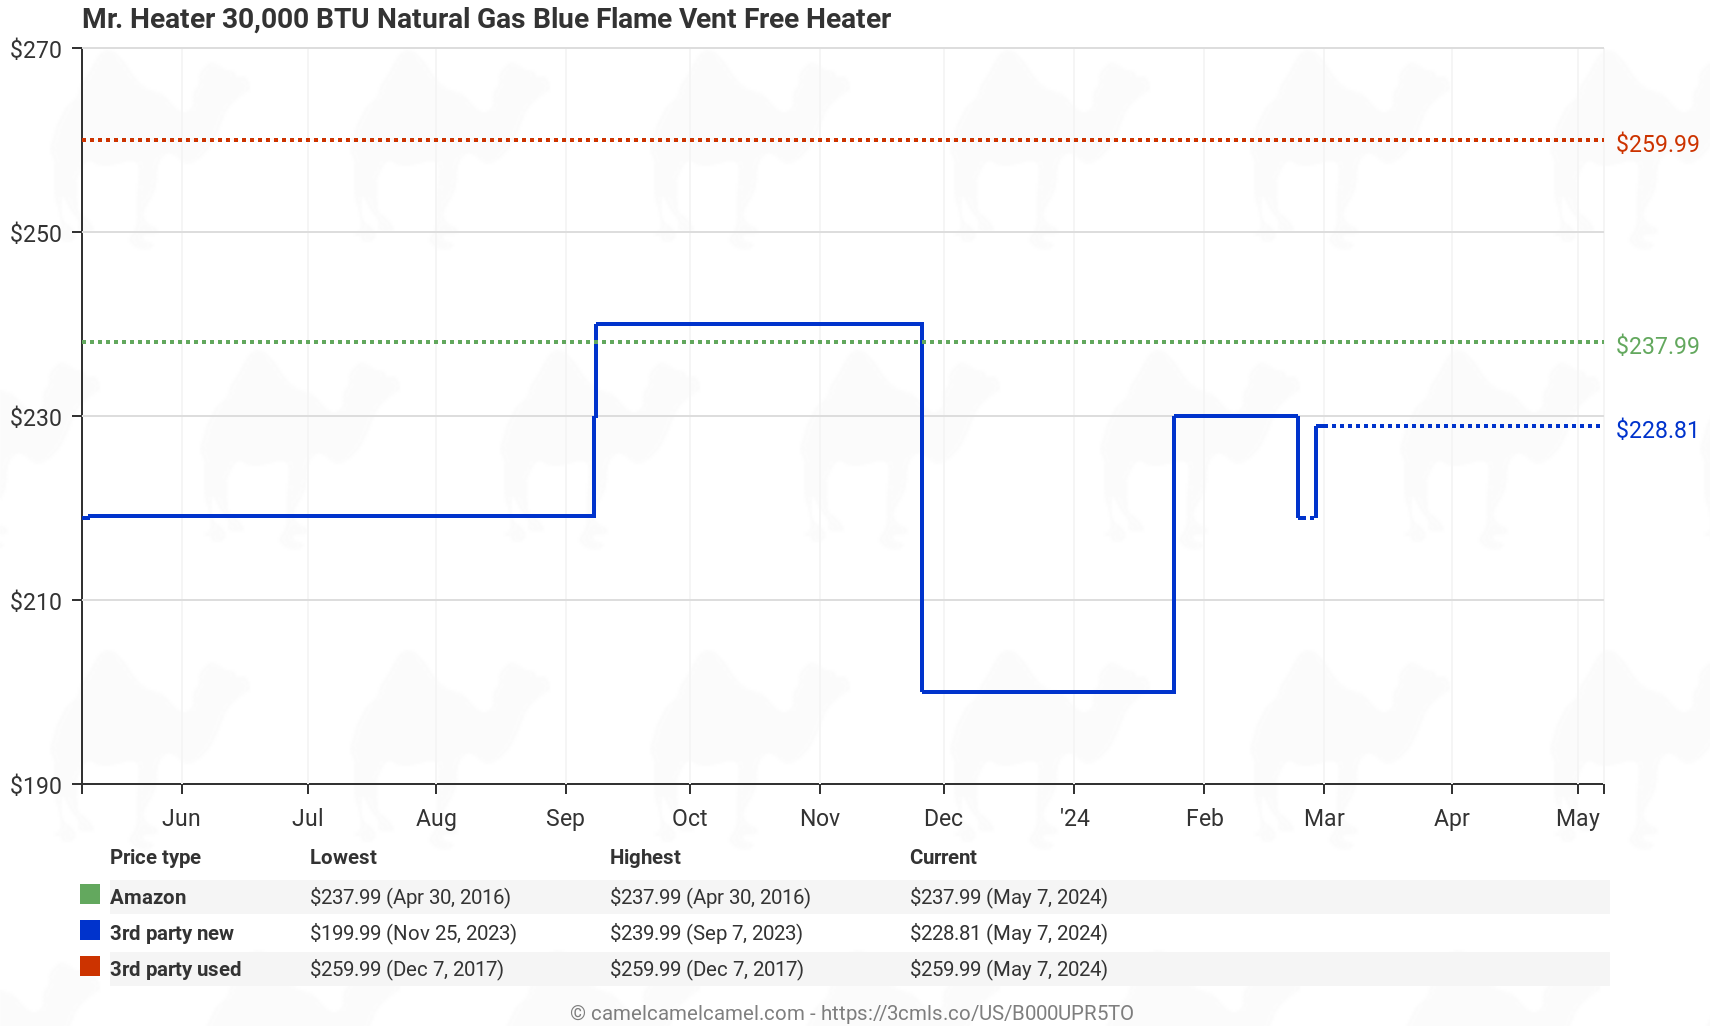 Mr. Heater 30,000 BTU Natural Gas Blue Flame Vent Free Heater - Price History: B000UPR5TO